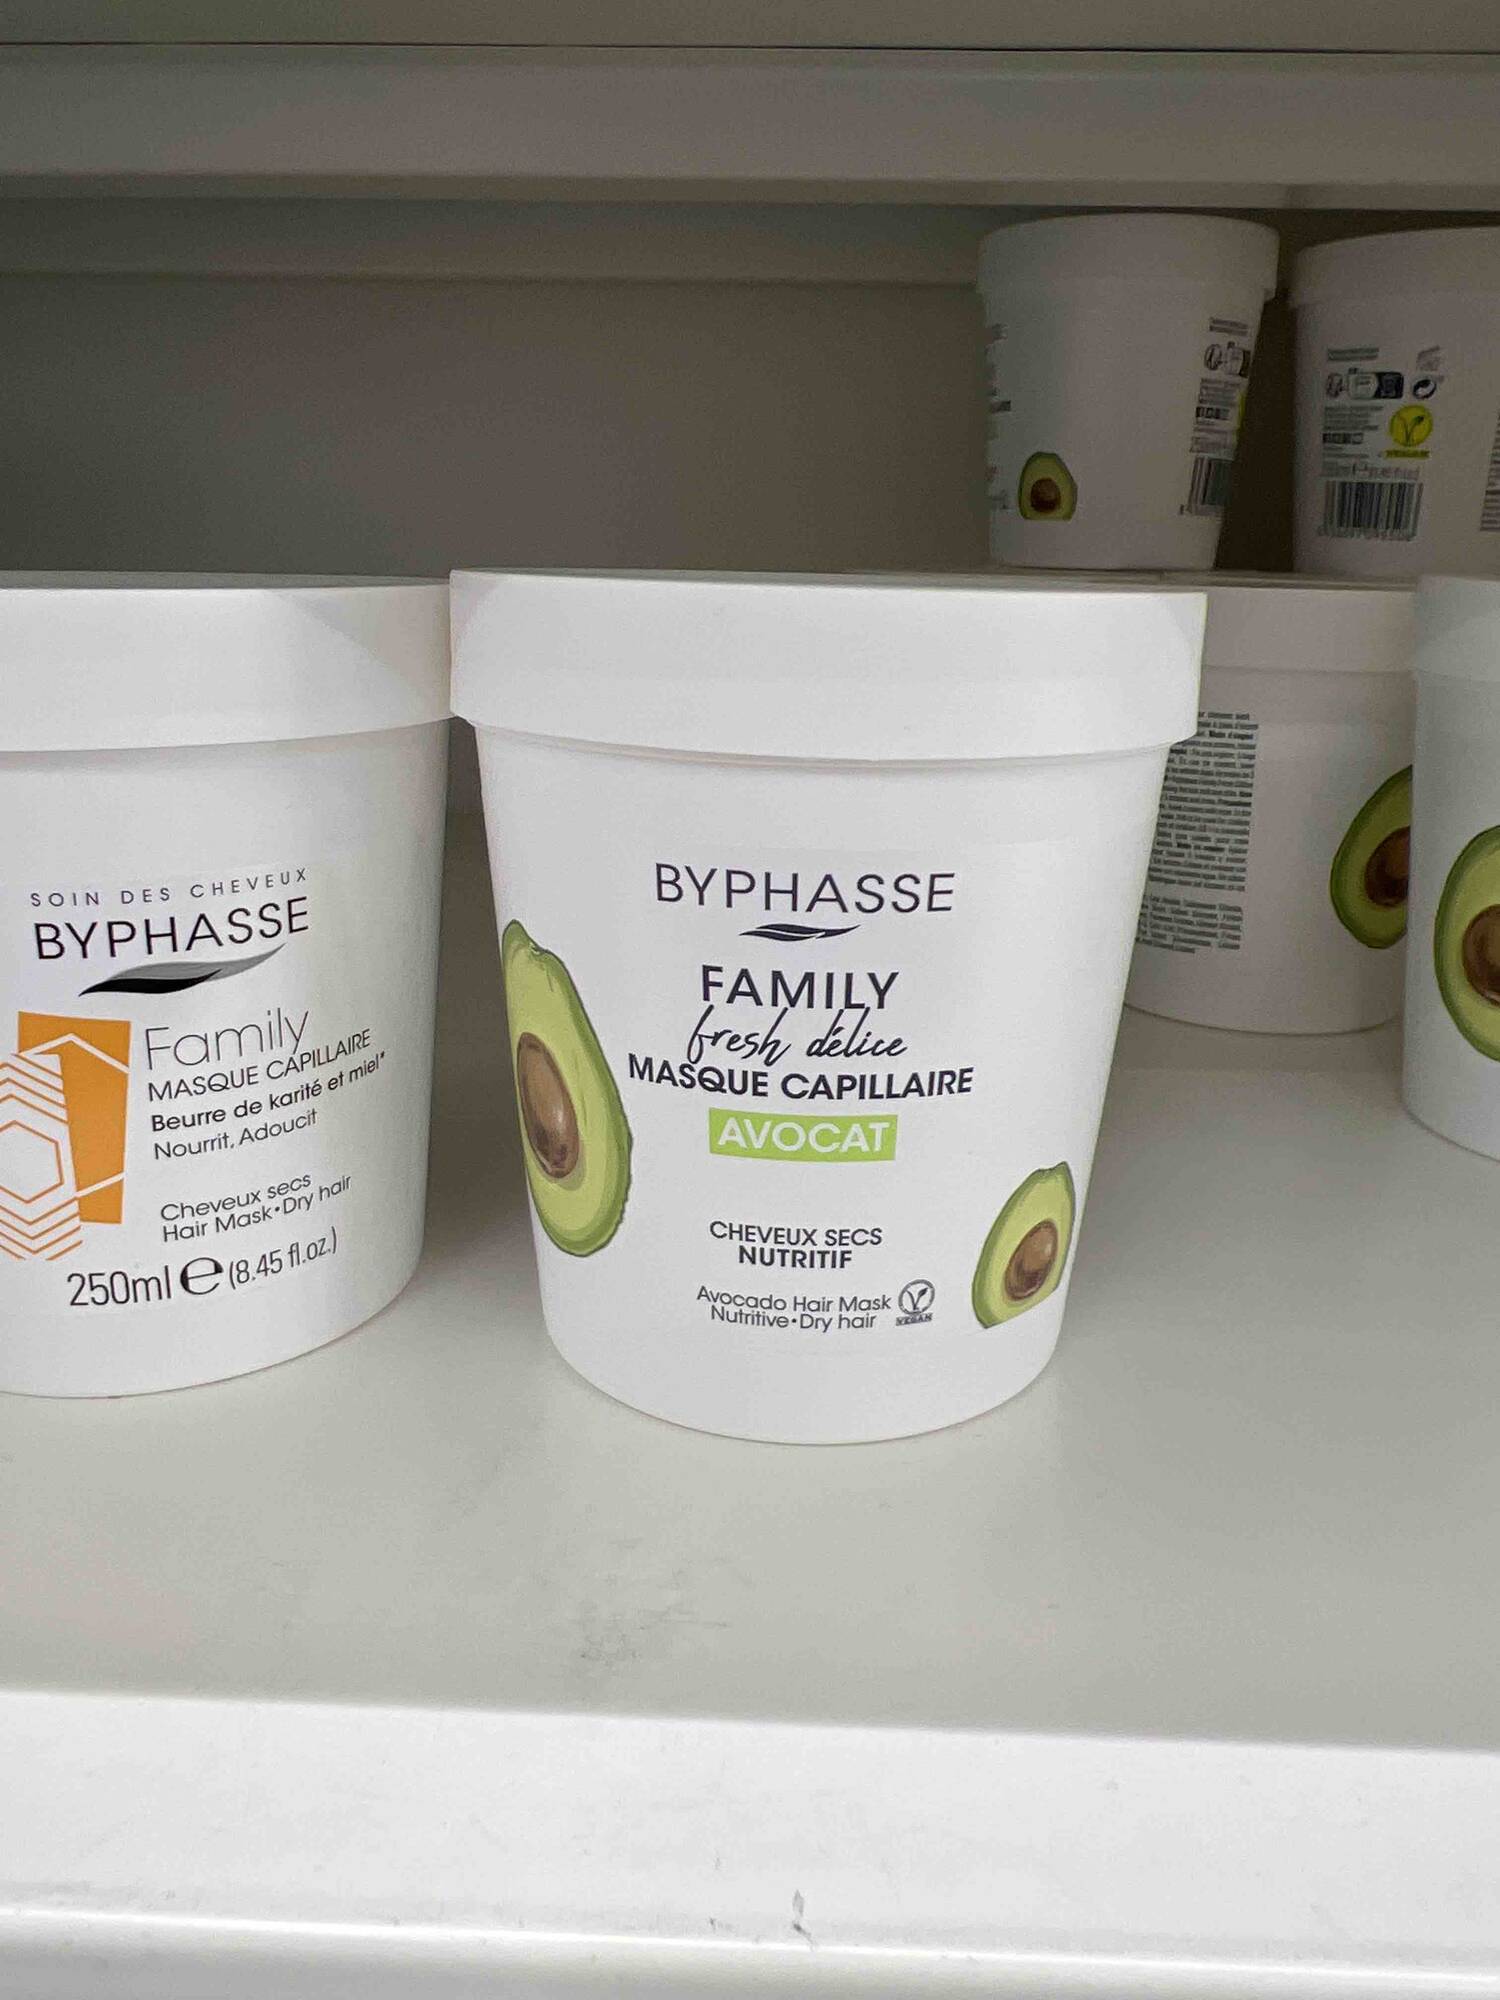 BYPHASE - Family - Masque capillaire avocat 